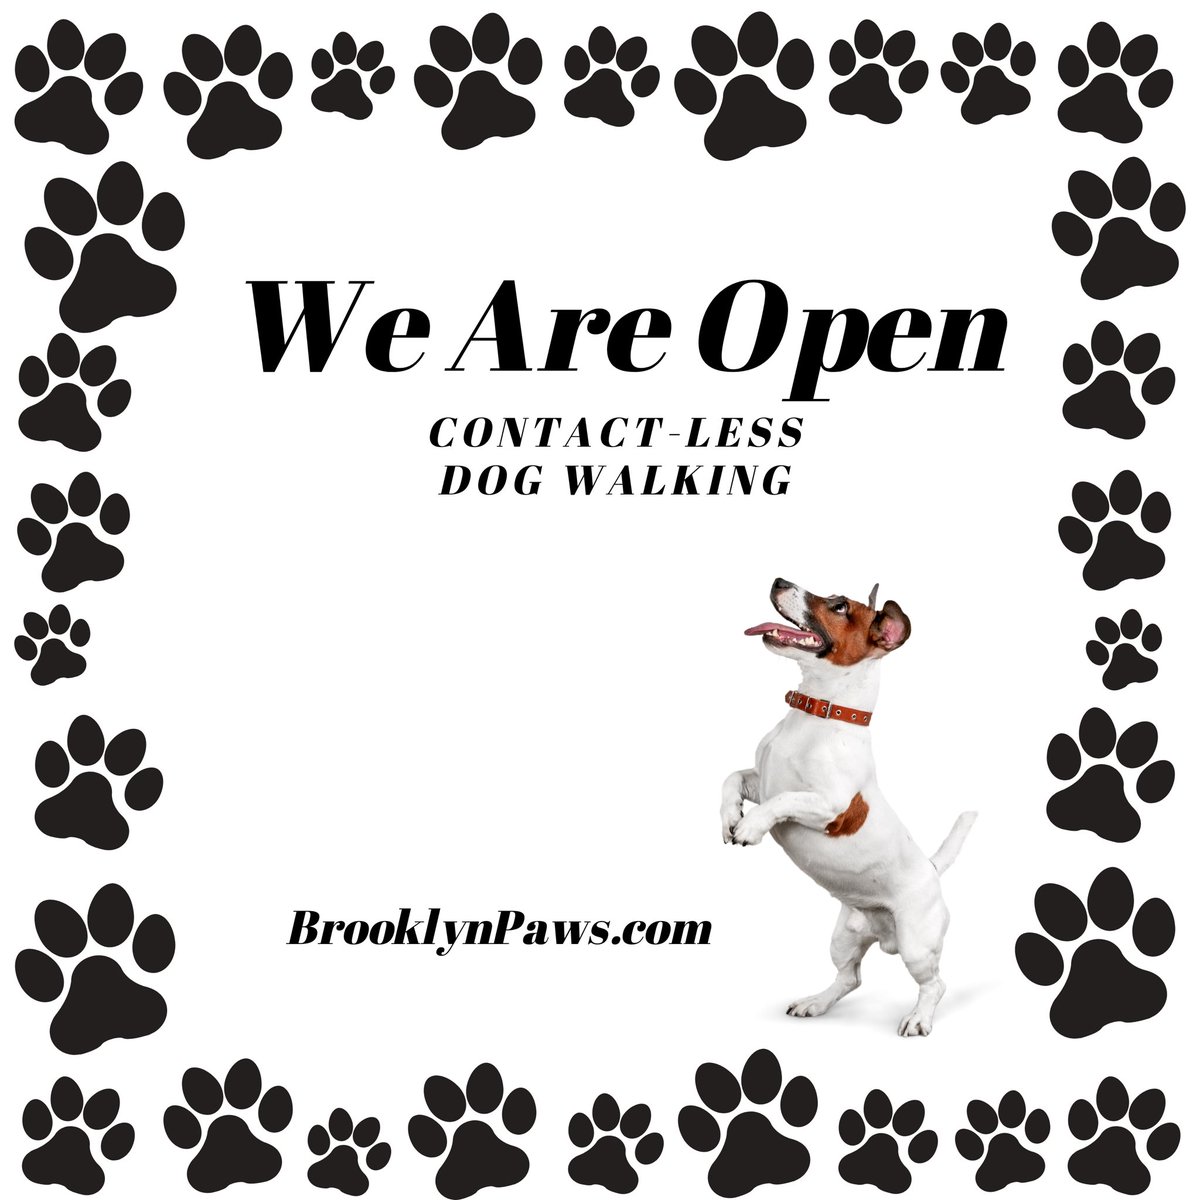 YES! We Are Open for Contact-less Dog walking services 🐾💕🐾 #dogwalking #brooklynpaws #paws #brooklyn #dumbo #brooklynheights #welovedogs #weareopen #contactless #contactlessservices #contactlessdogwalking